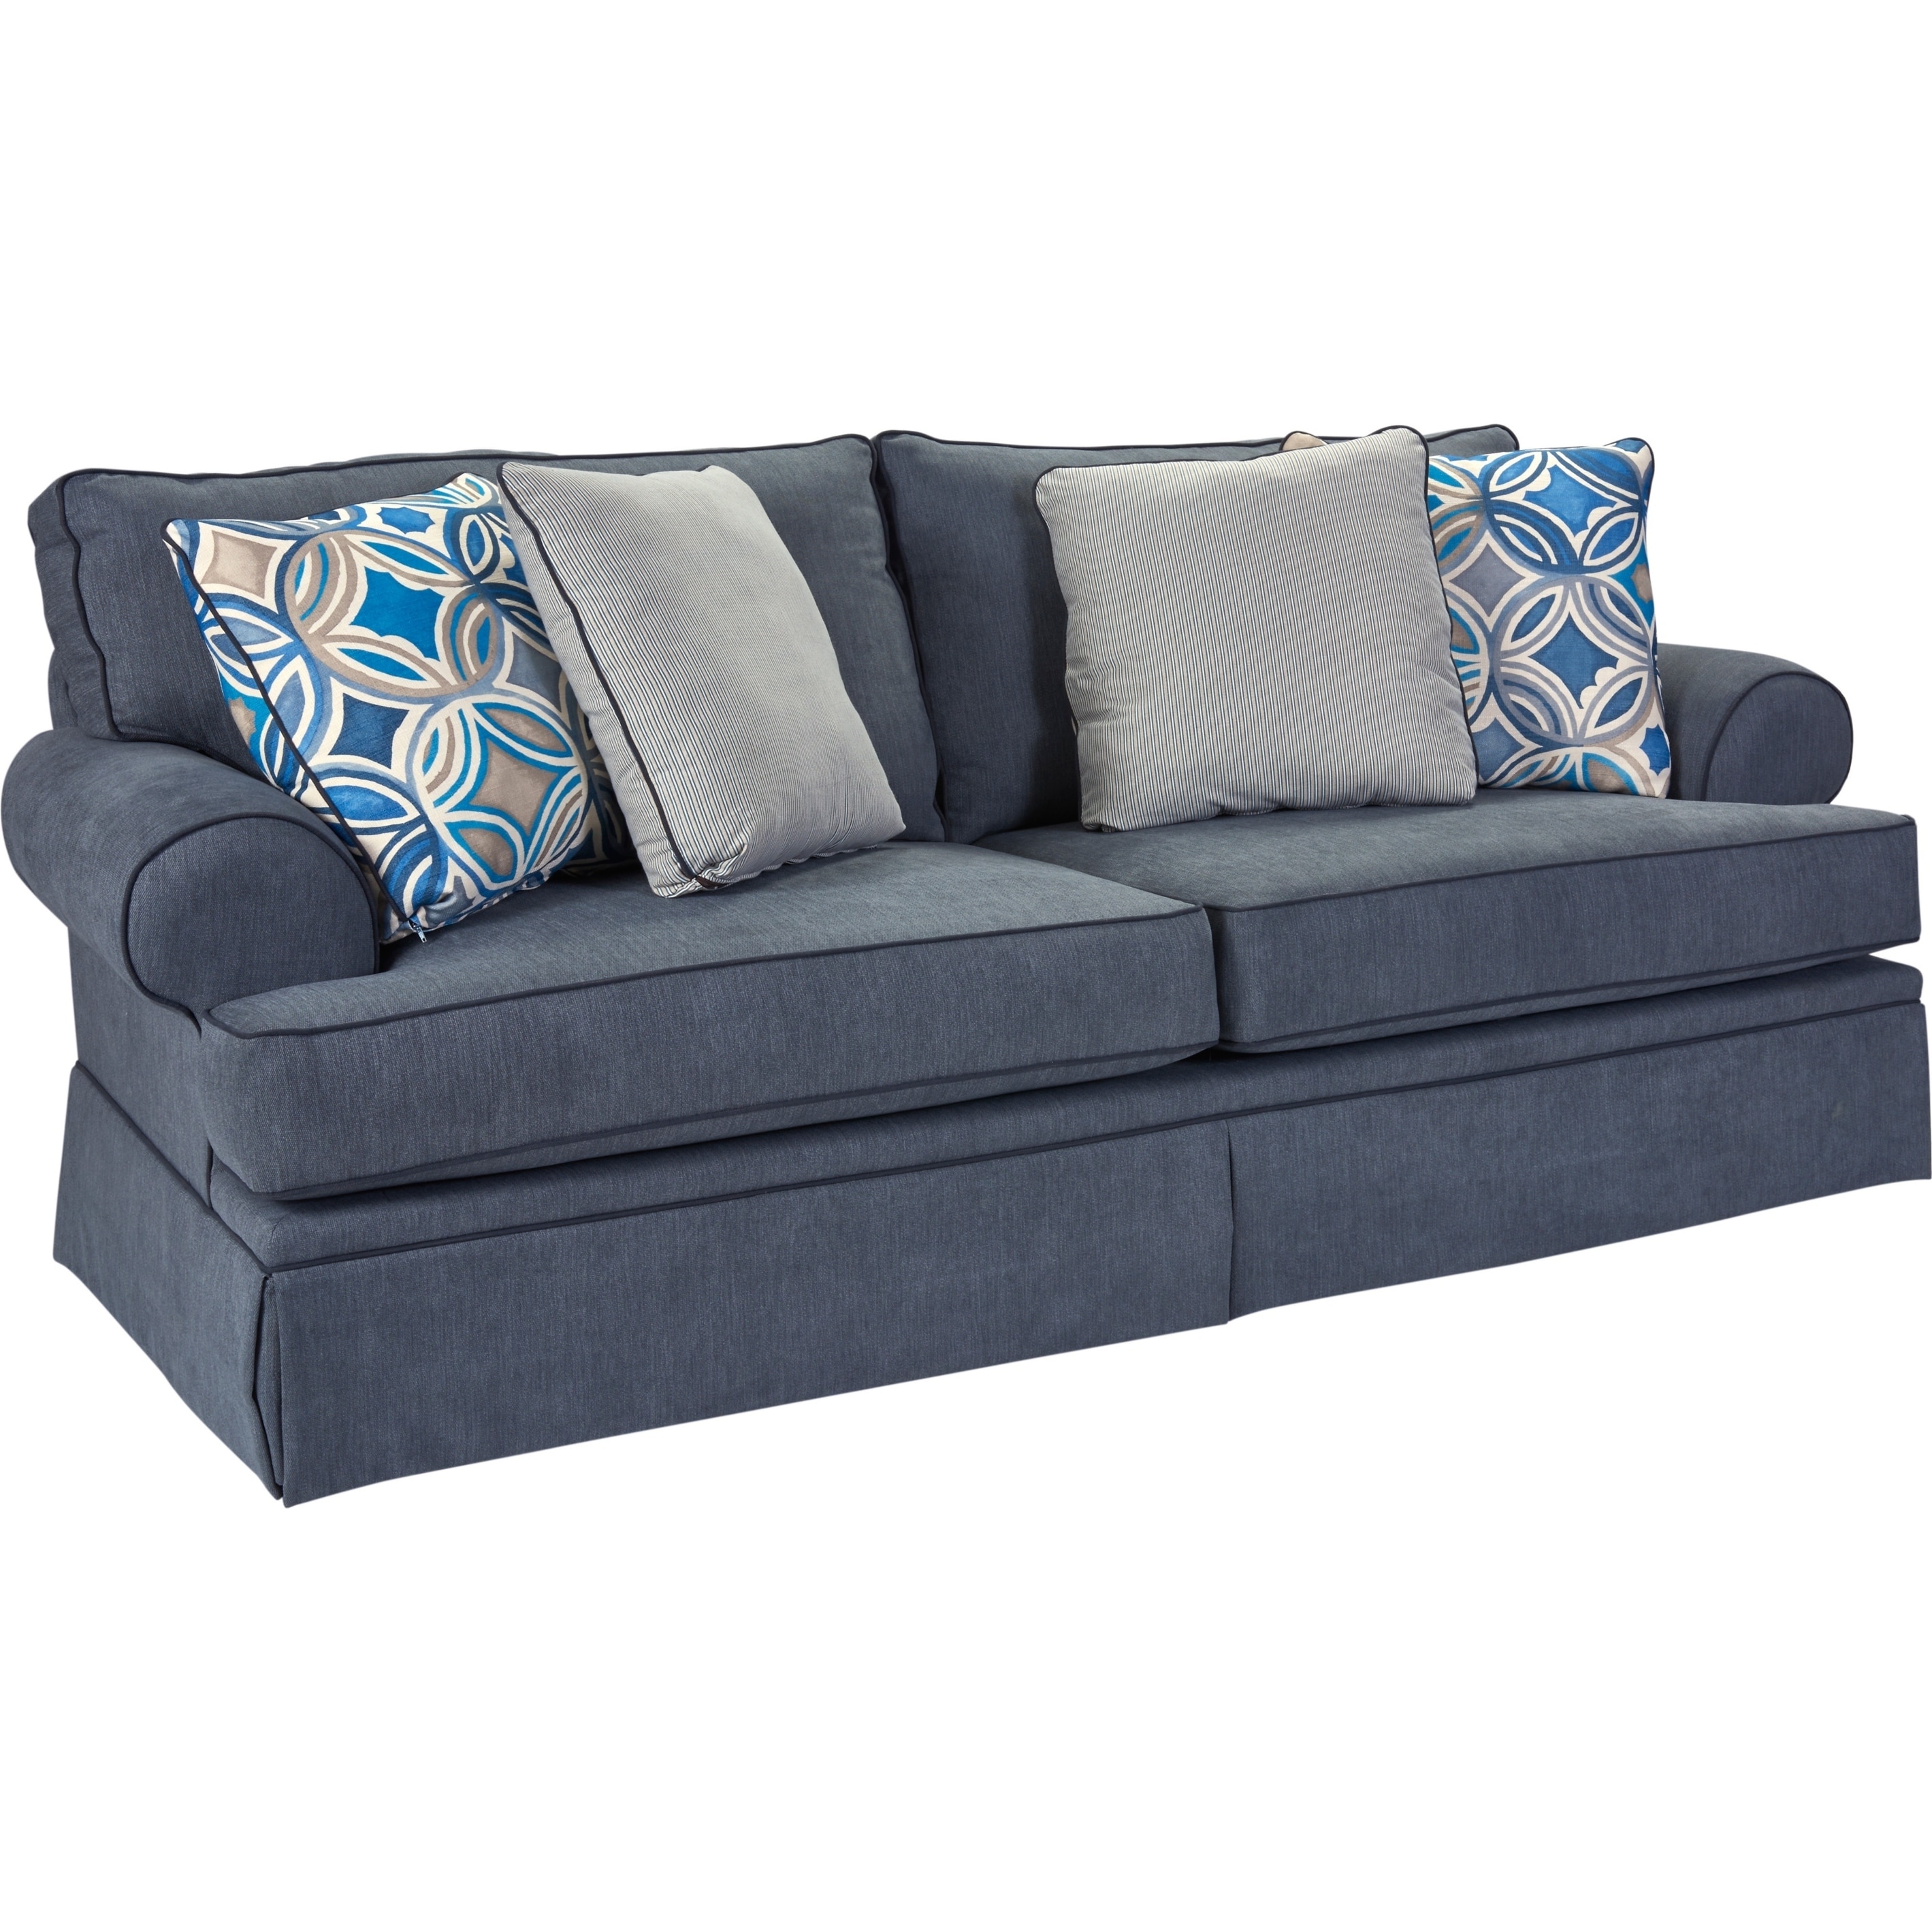 Broyhill Emily Sofa In Blue Overstock 12330359